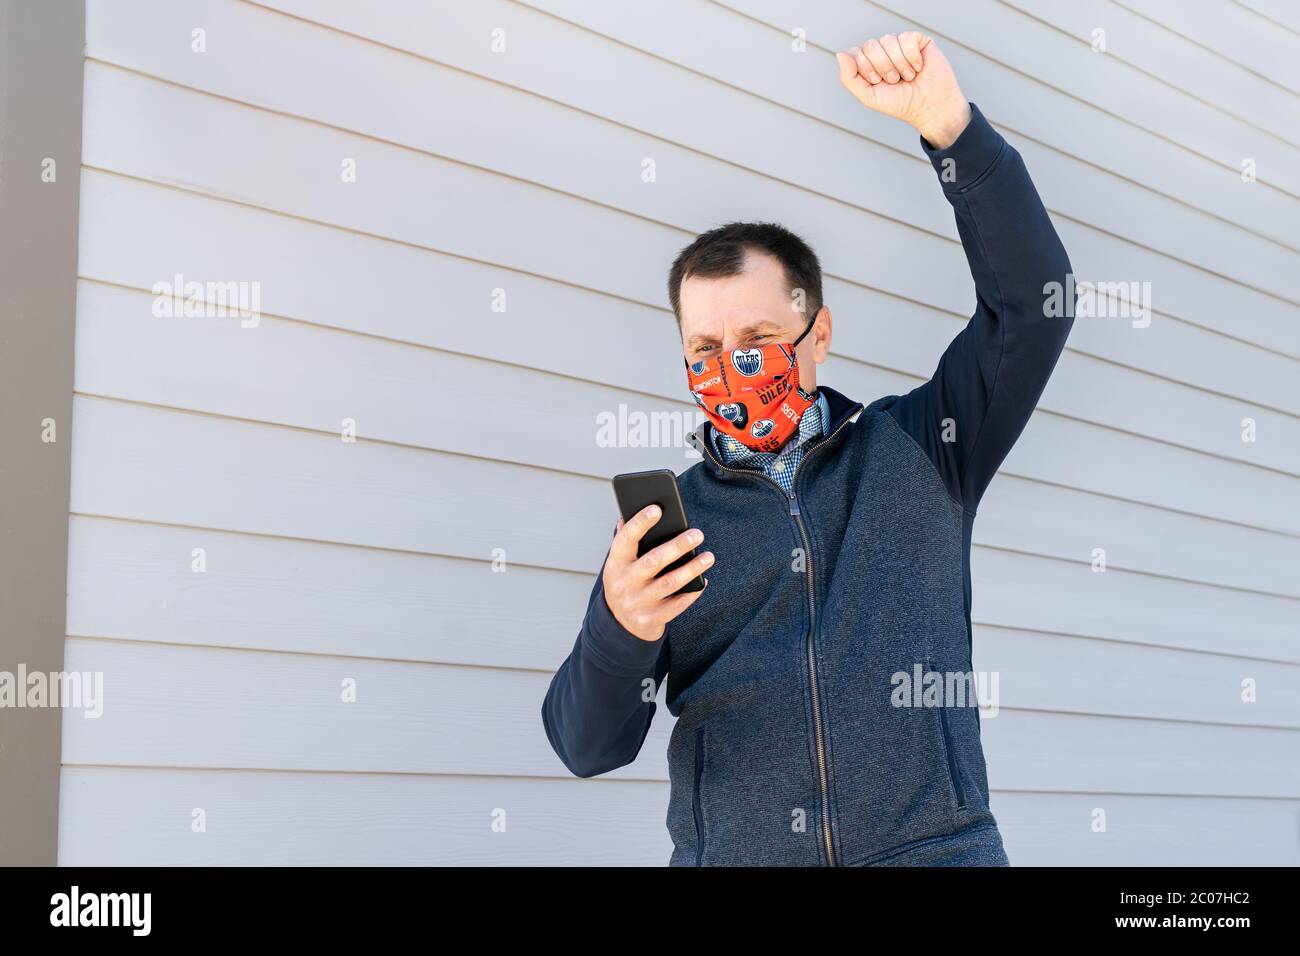 Edmonton, AB, Canada - June 8, 2020: Edmonton Oilers Fan is wearing theme protective cotton mask with Edmonton Oilers logo and cheering for the NHL te Stock Photo